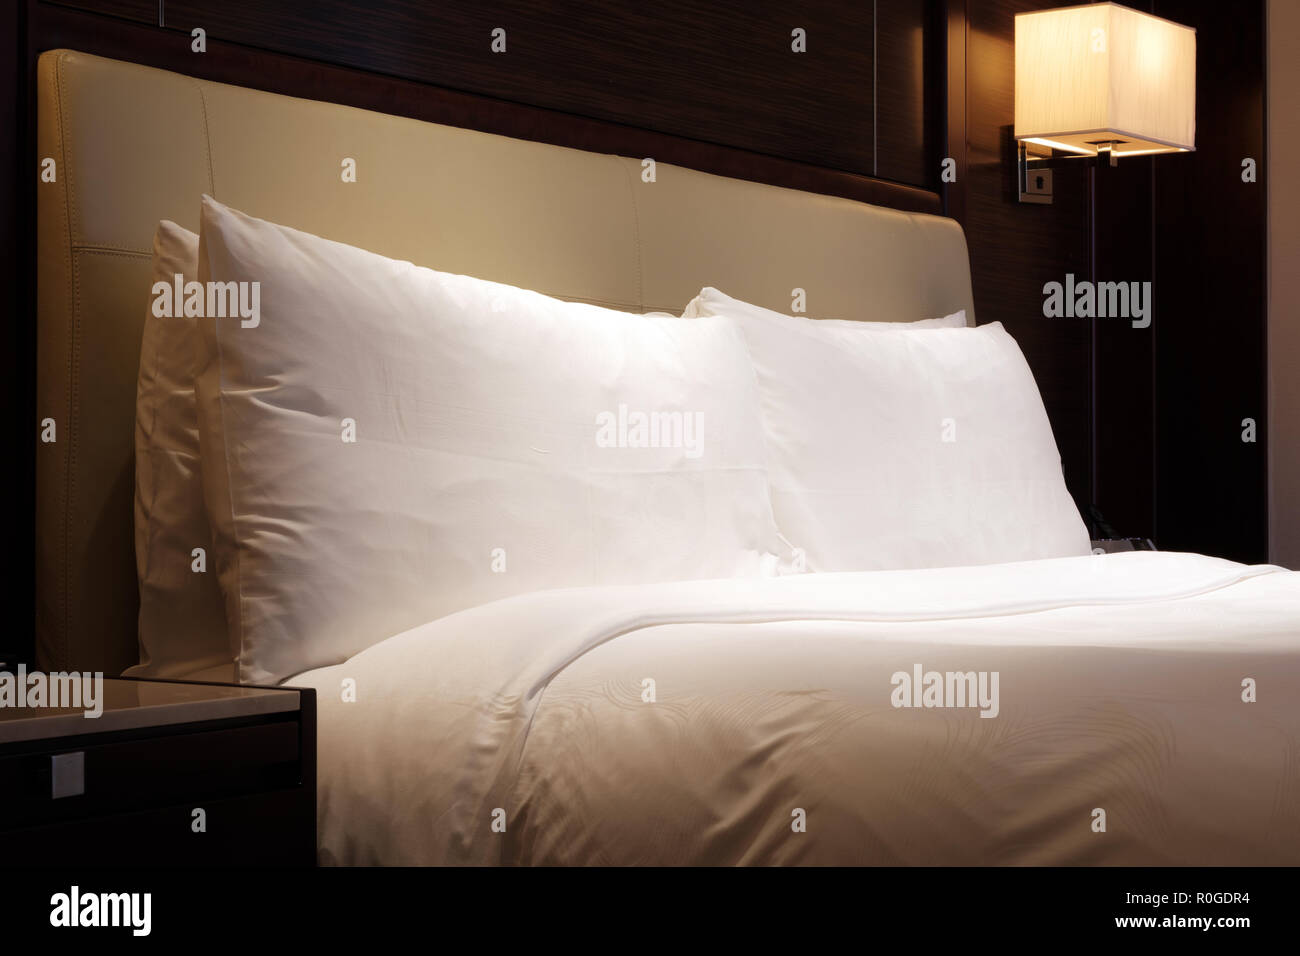 Standard King Size Beds Hotel Room Stock Photo 224096856 Alamy